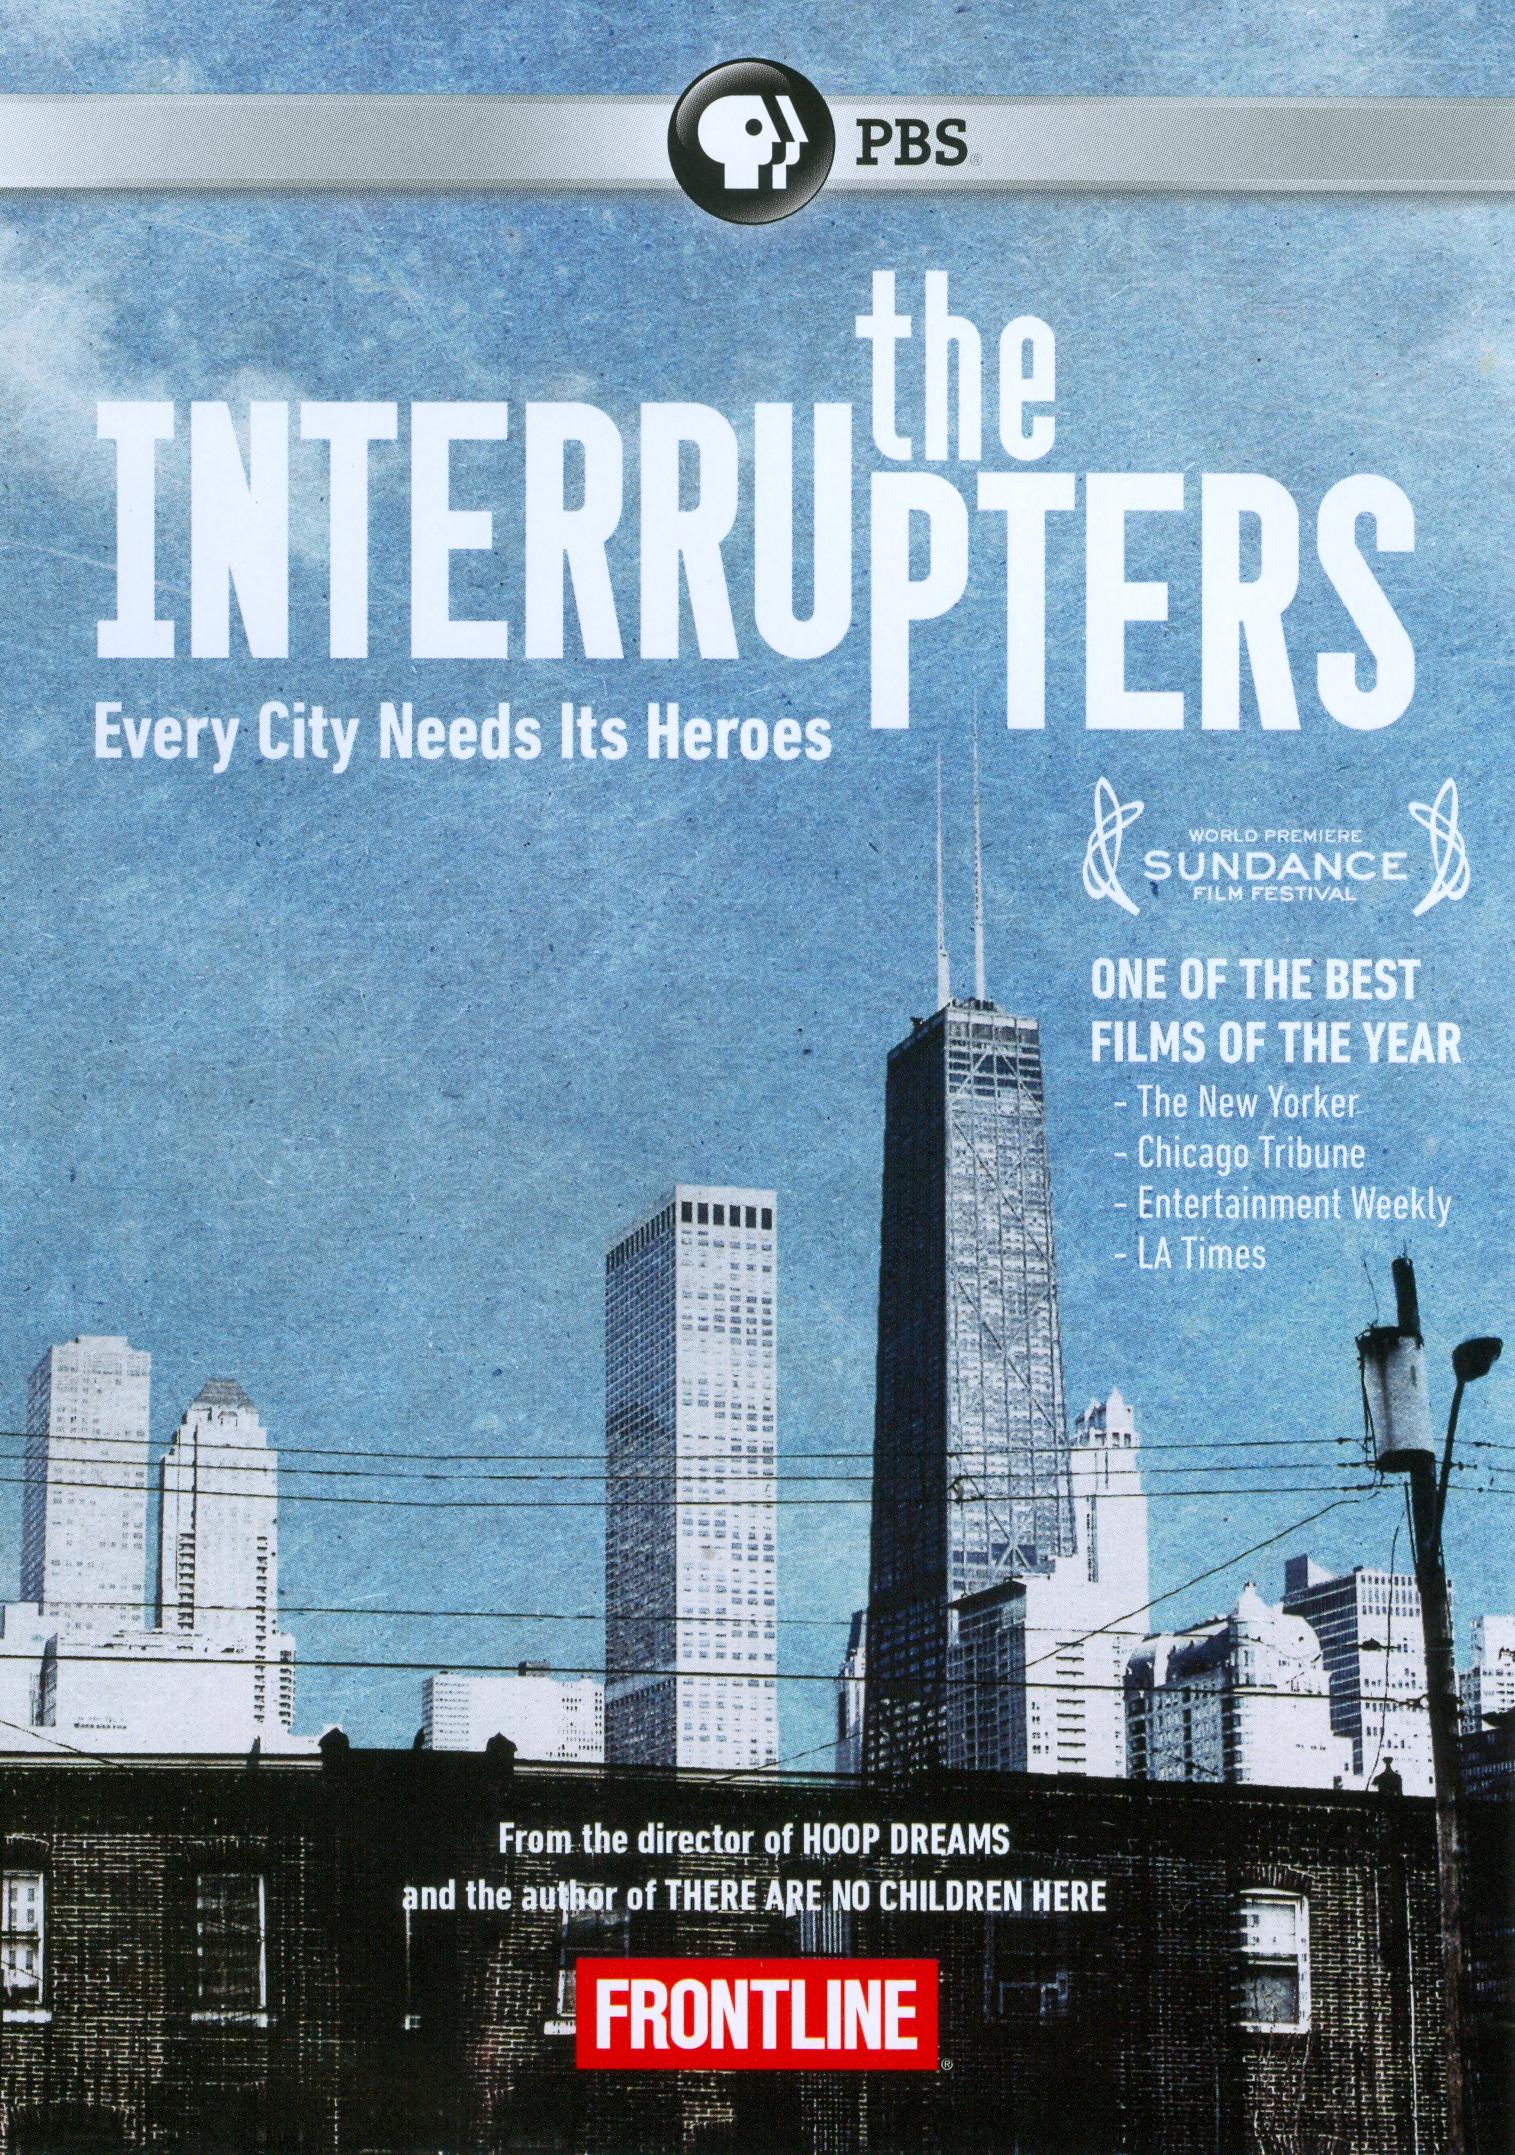 The Interrupters (2011) Main Poster